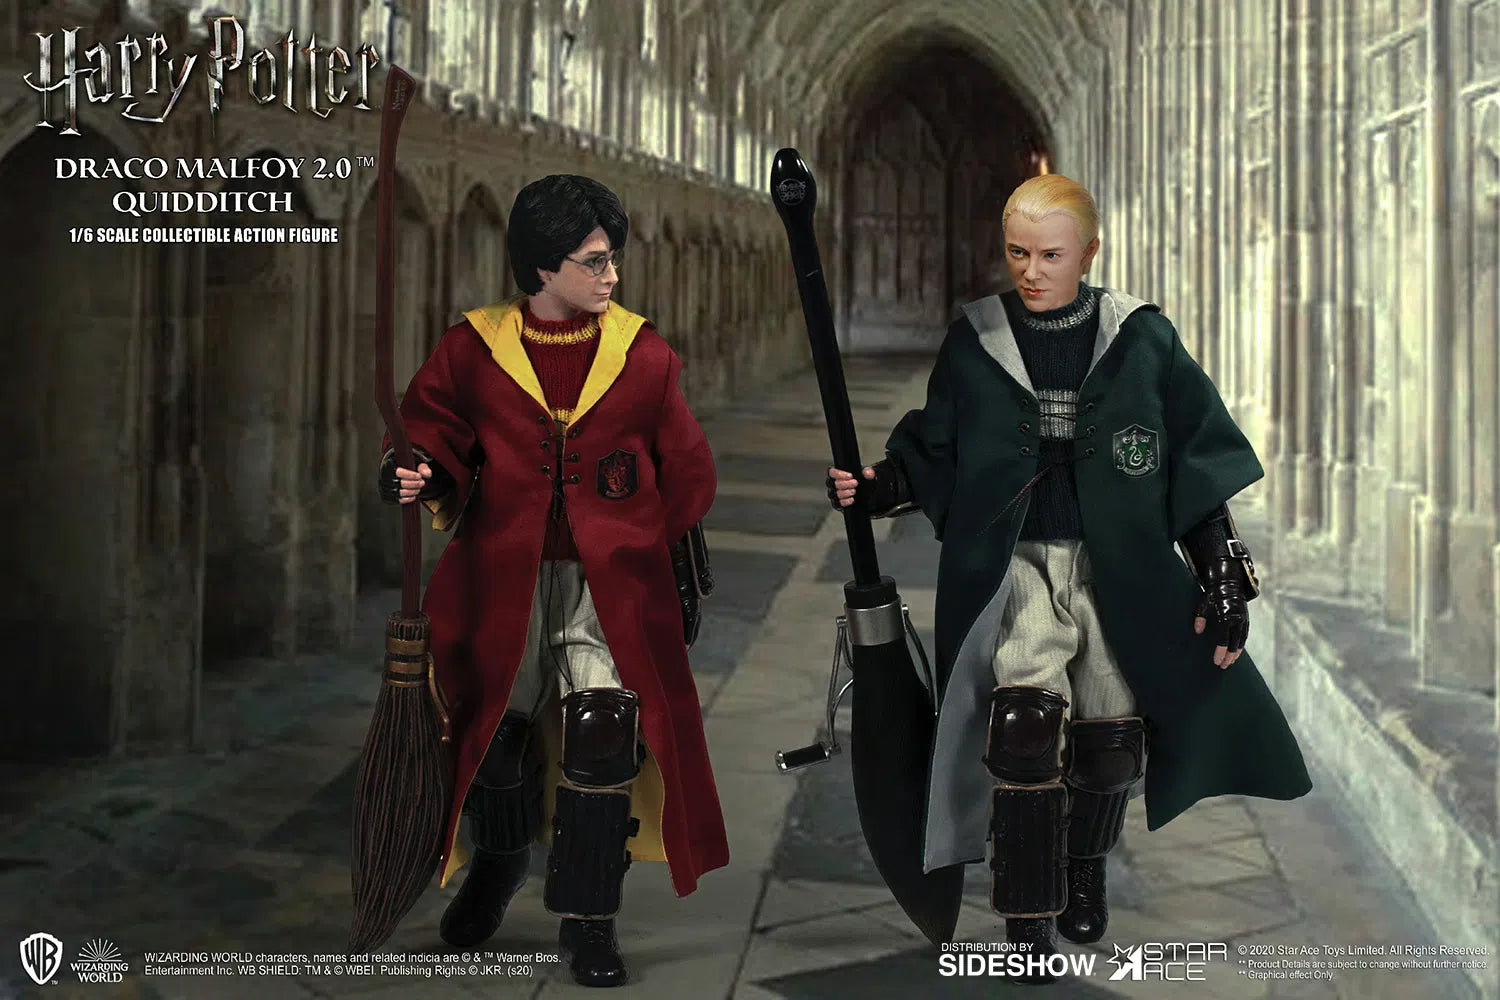 Harry Potter & The Chamber Of Secrets: Harry & Draco 2.0: Sixth Scale Figure Set: Star Ace